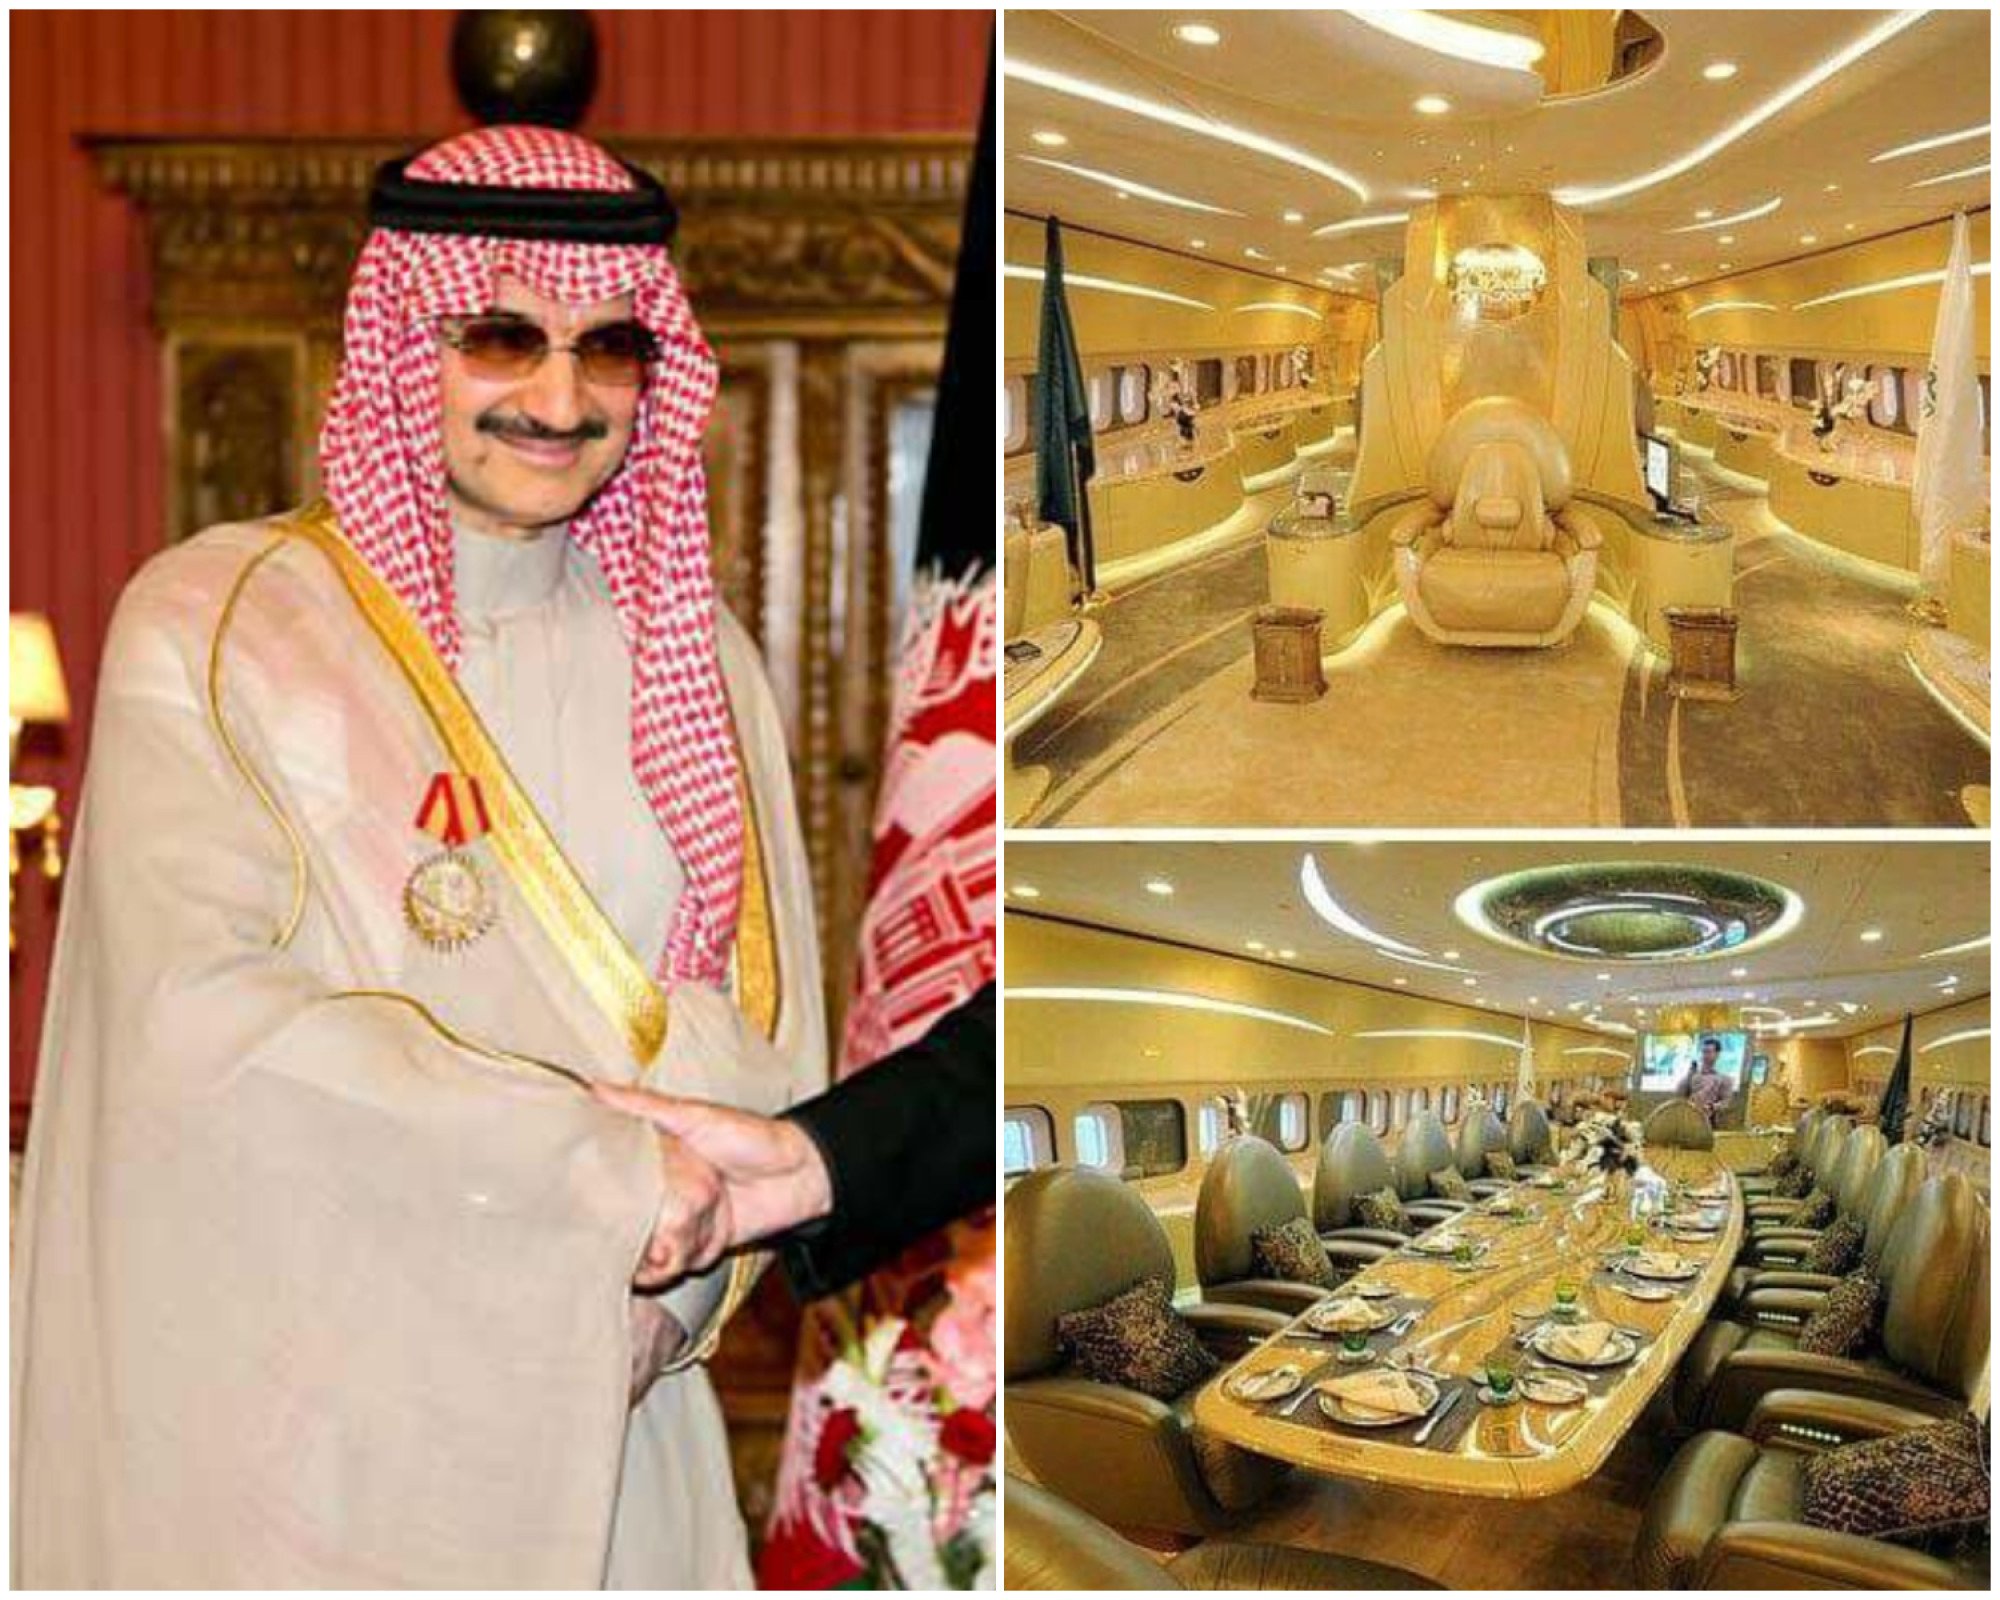 A plane fit for a royal, for sure. Photos: @prince_alwaleed.bin_talal, @luxerish/Instagram